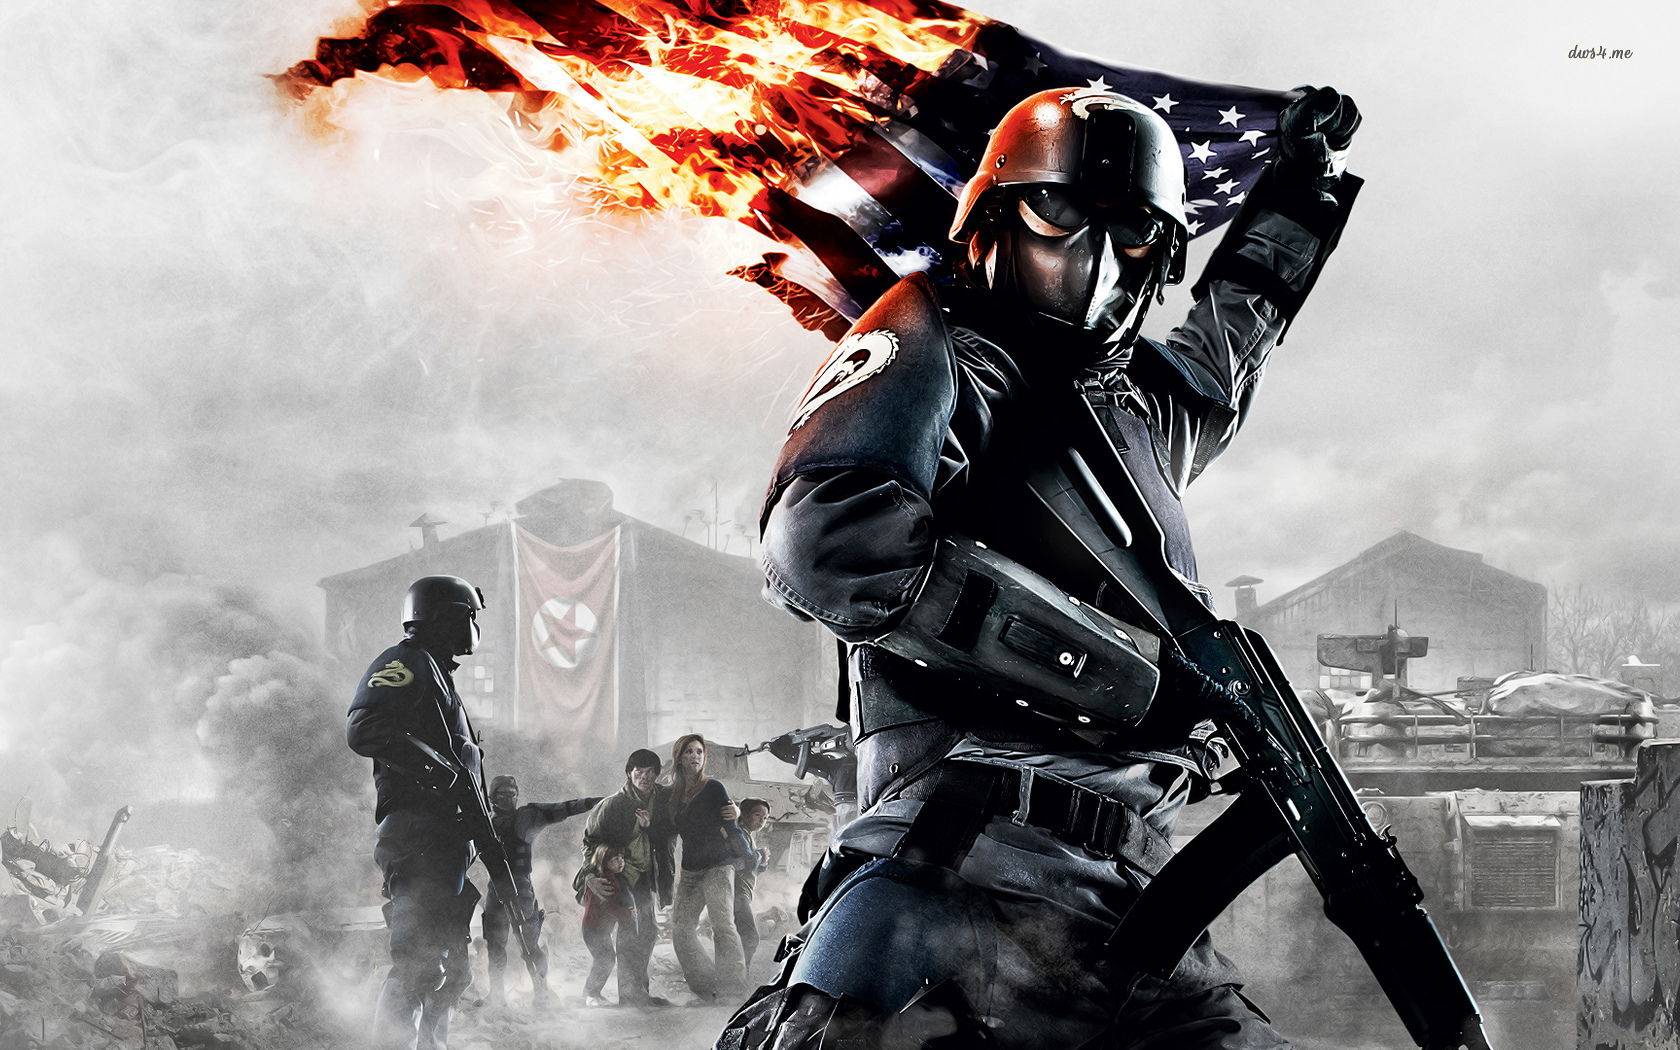 download free homefront the revolution 2